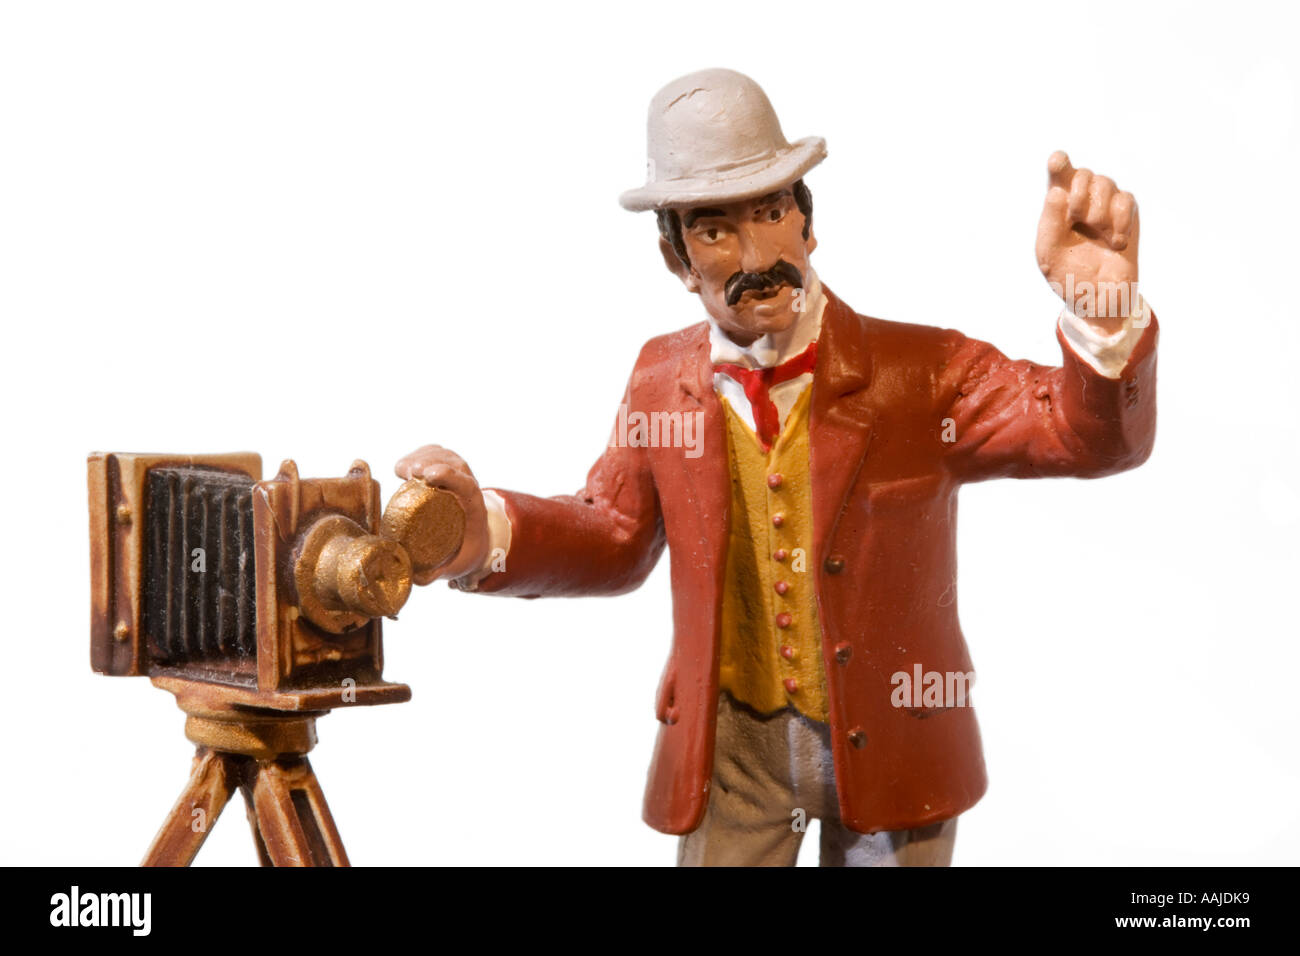 Model of photographer with old camera Stock Photo